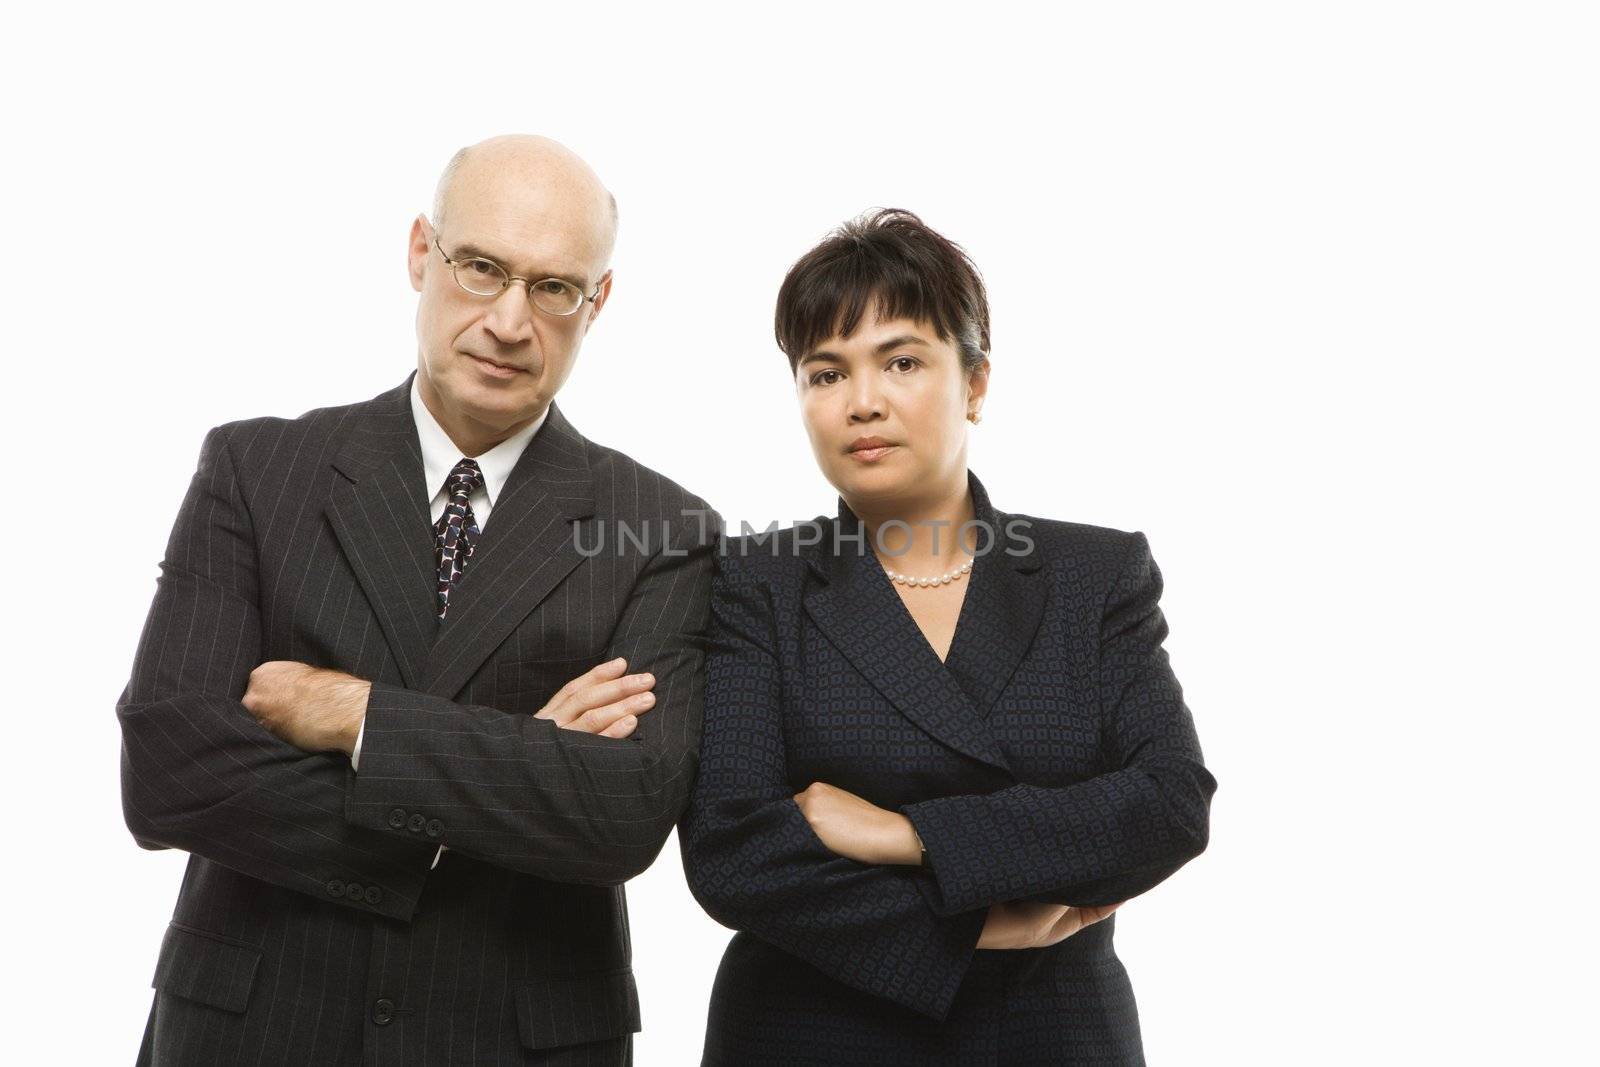 Caucasian middle-aged businessman and Filipino businesswoman standing with arms crossed against white background.